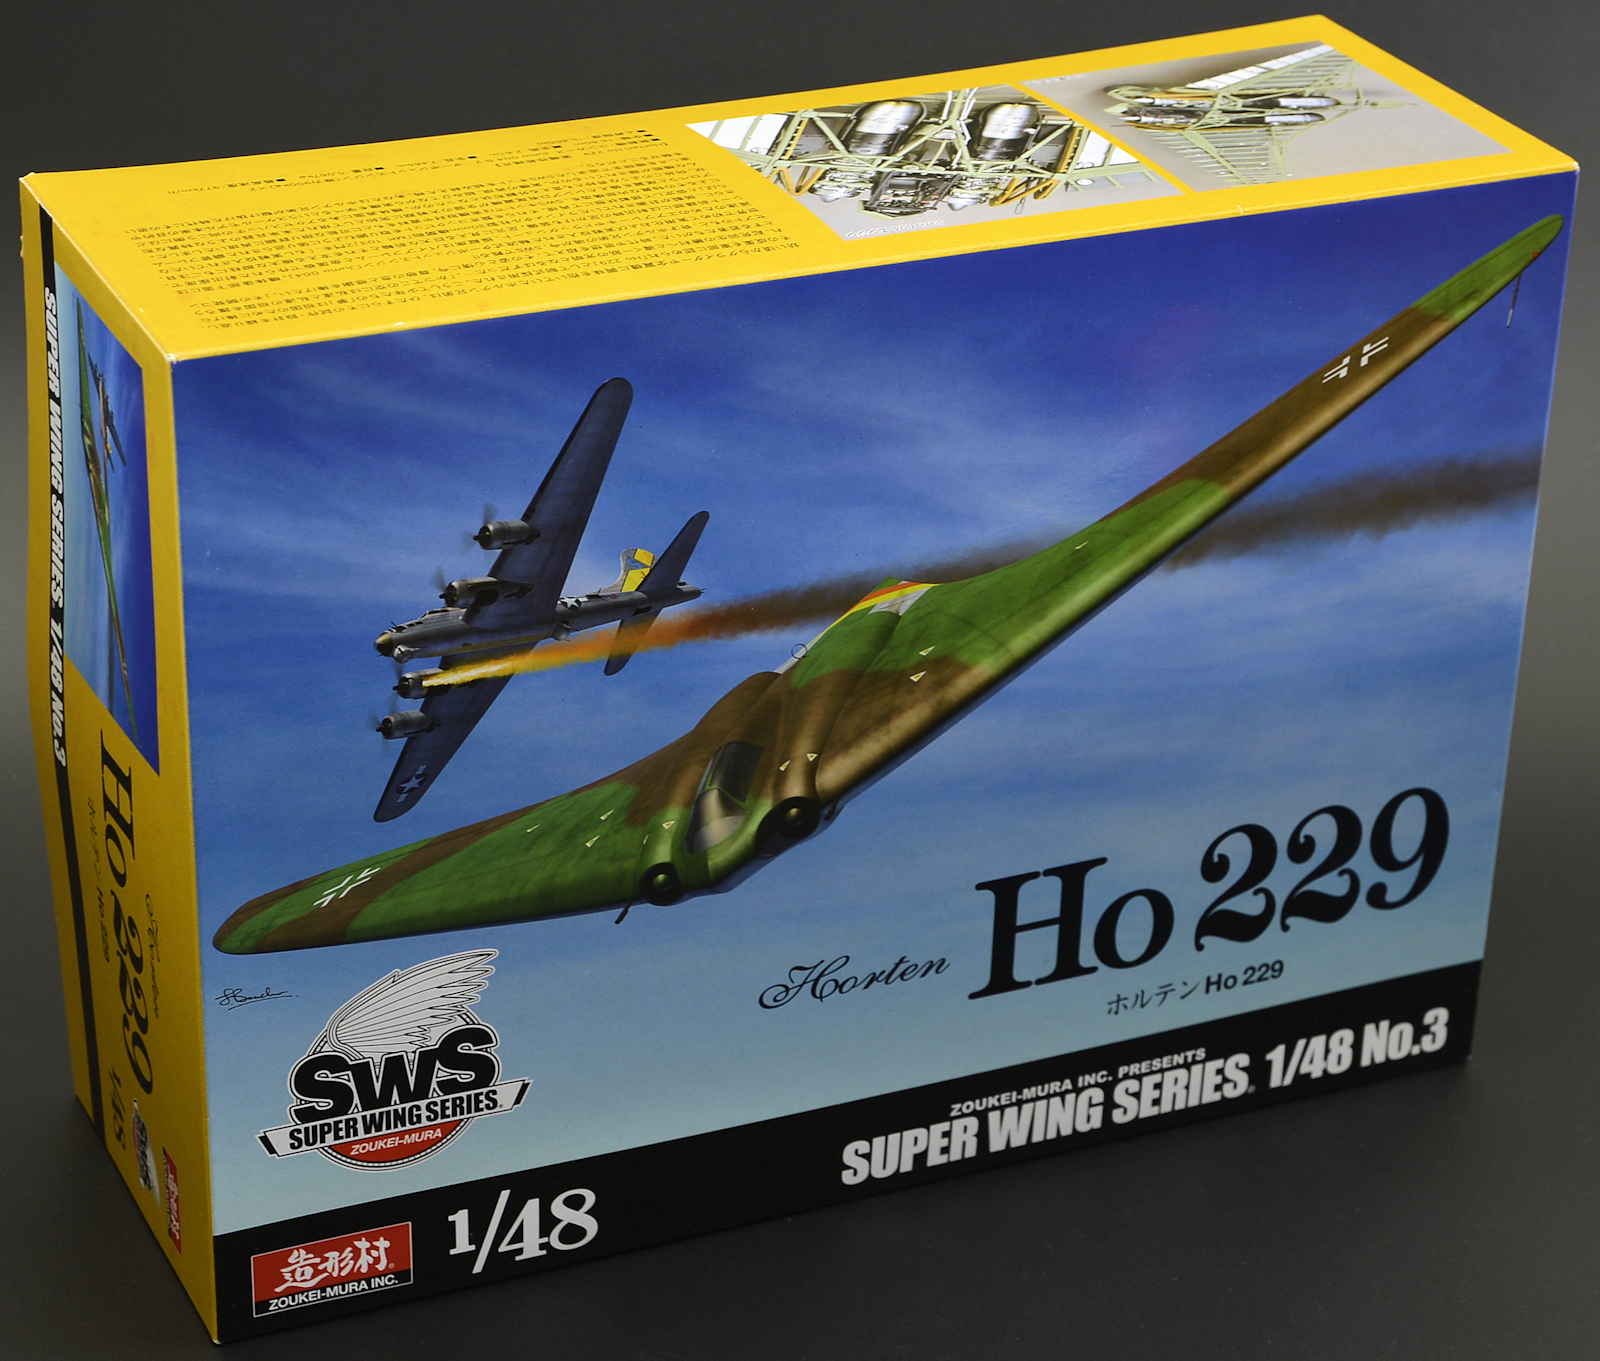 The Modelling News Gary S Build Of Zoukei Mura S 48th Scale Ho 229 Horten Pt I Getting It All Together